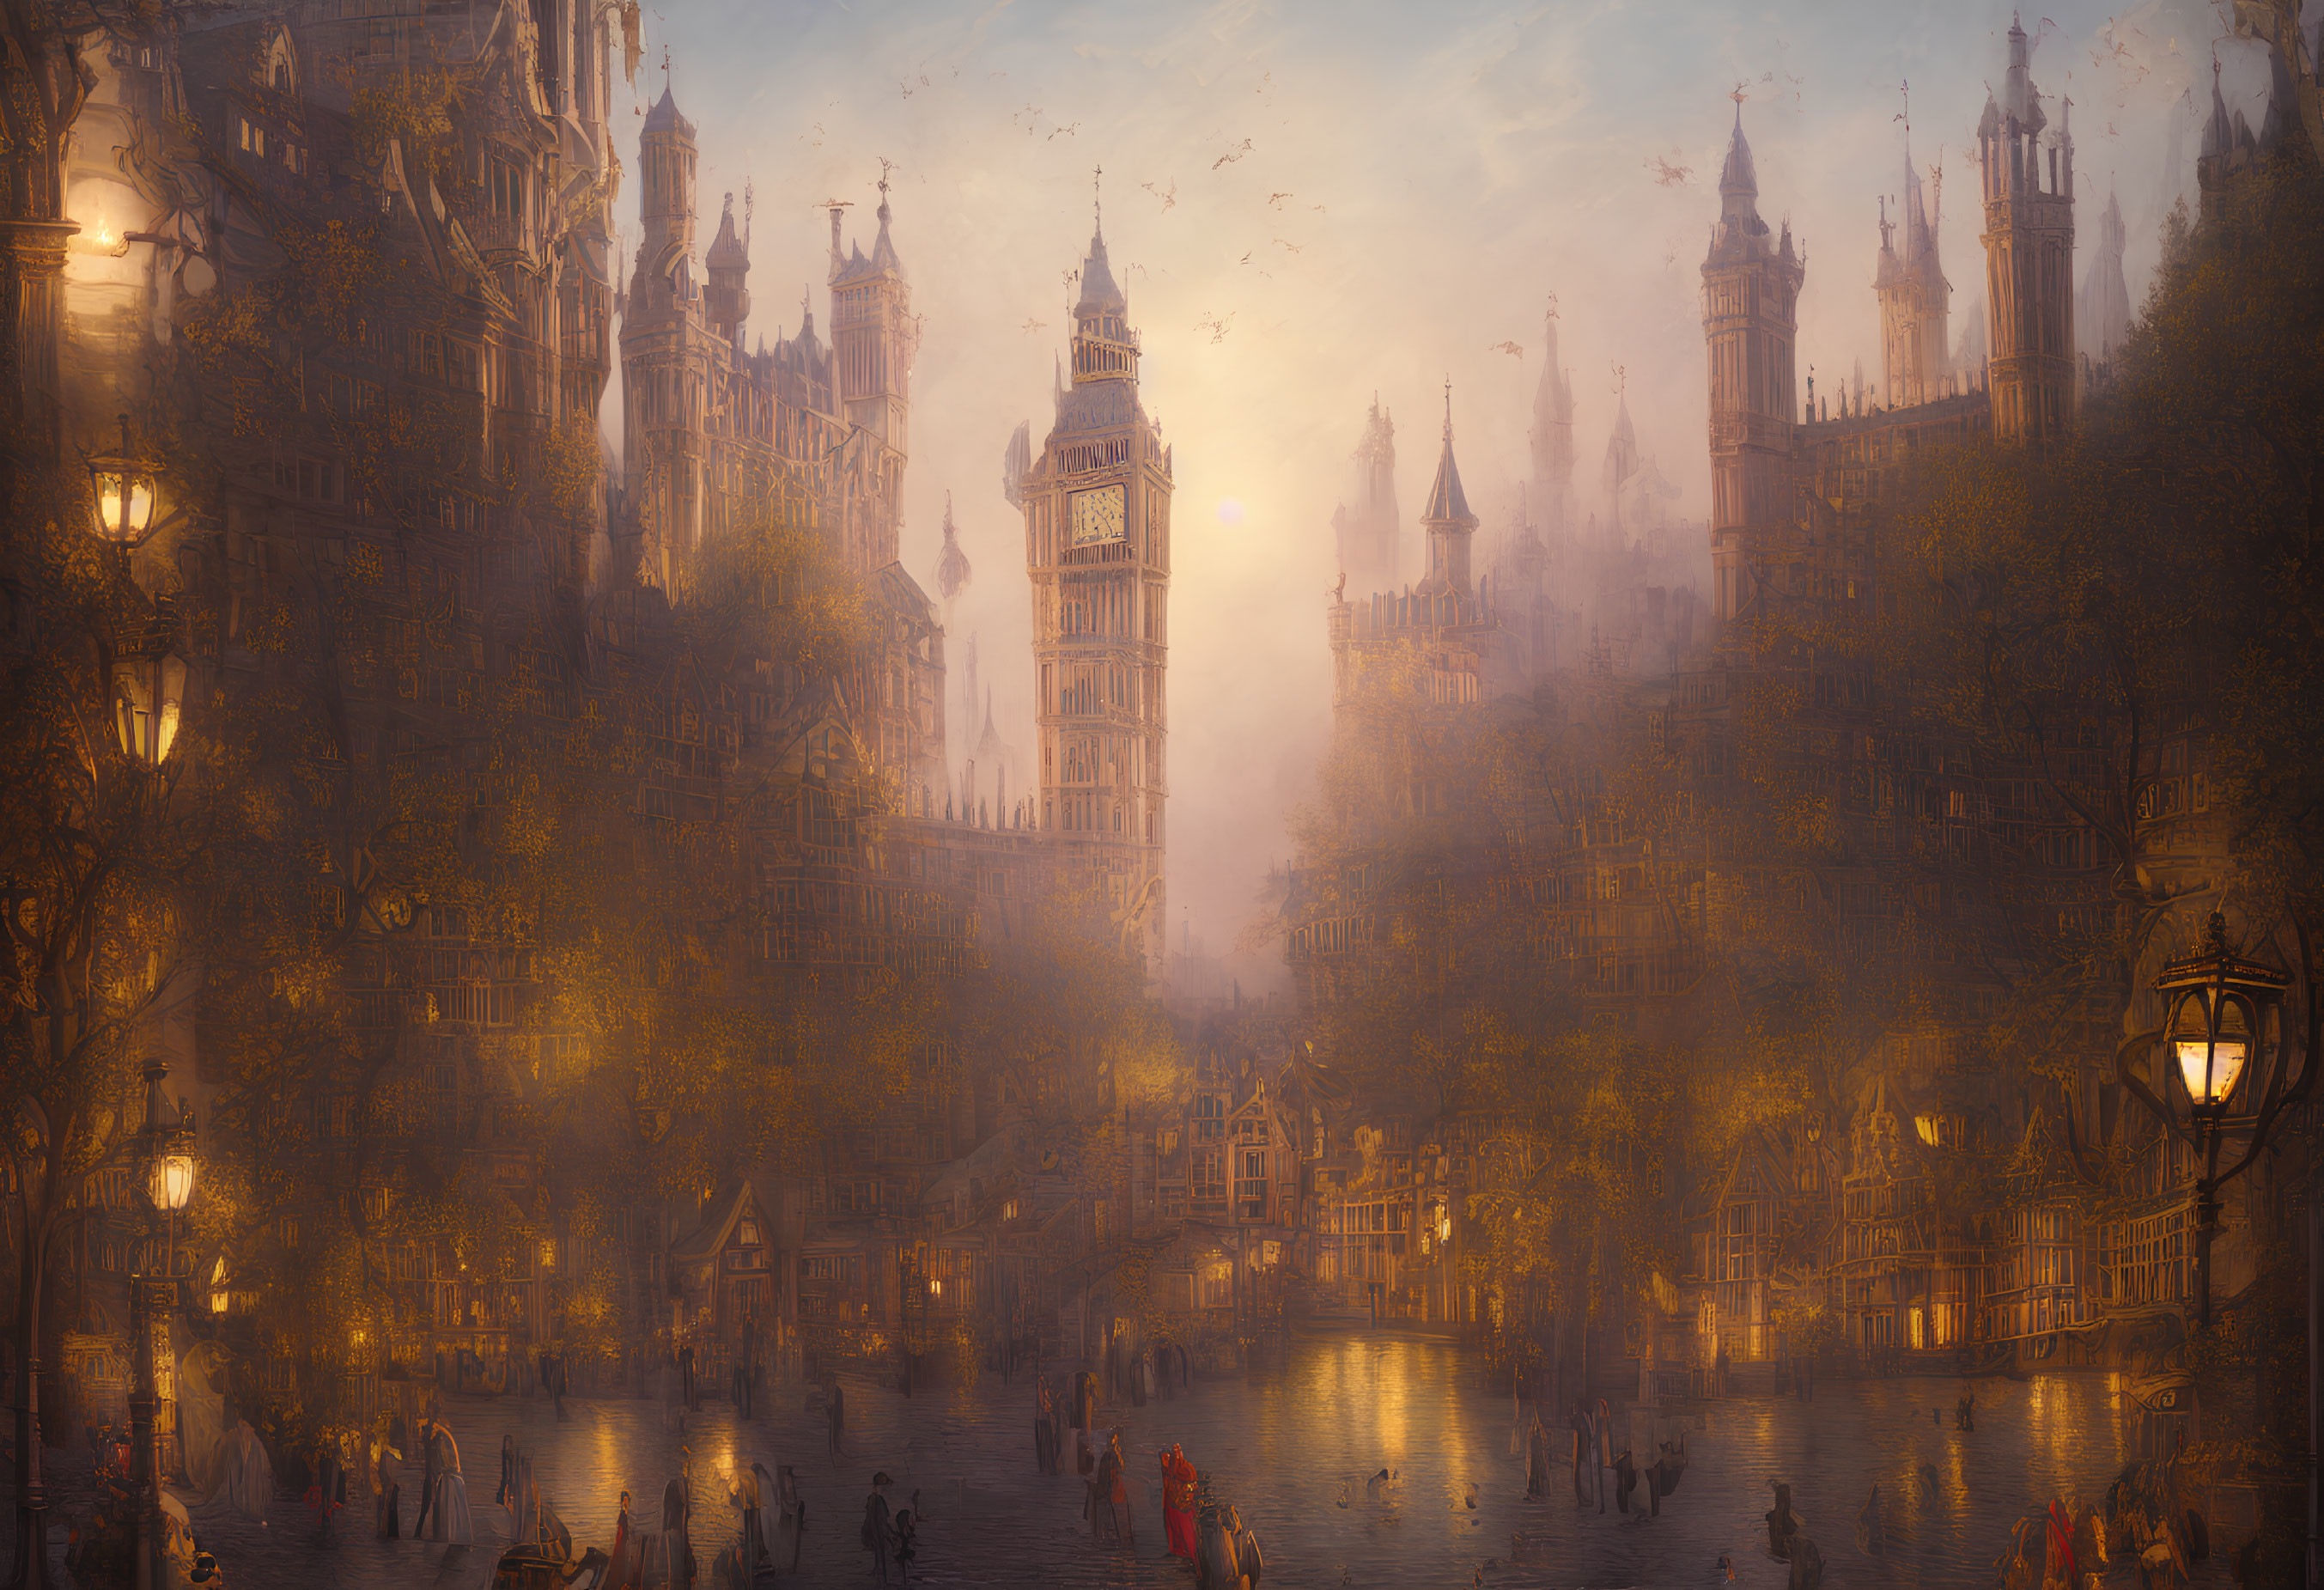 Gothic architecture in fantasy cityscape with warm golden lighting